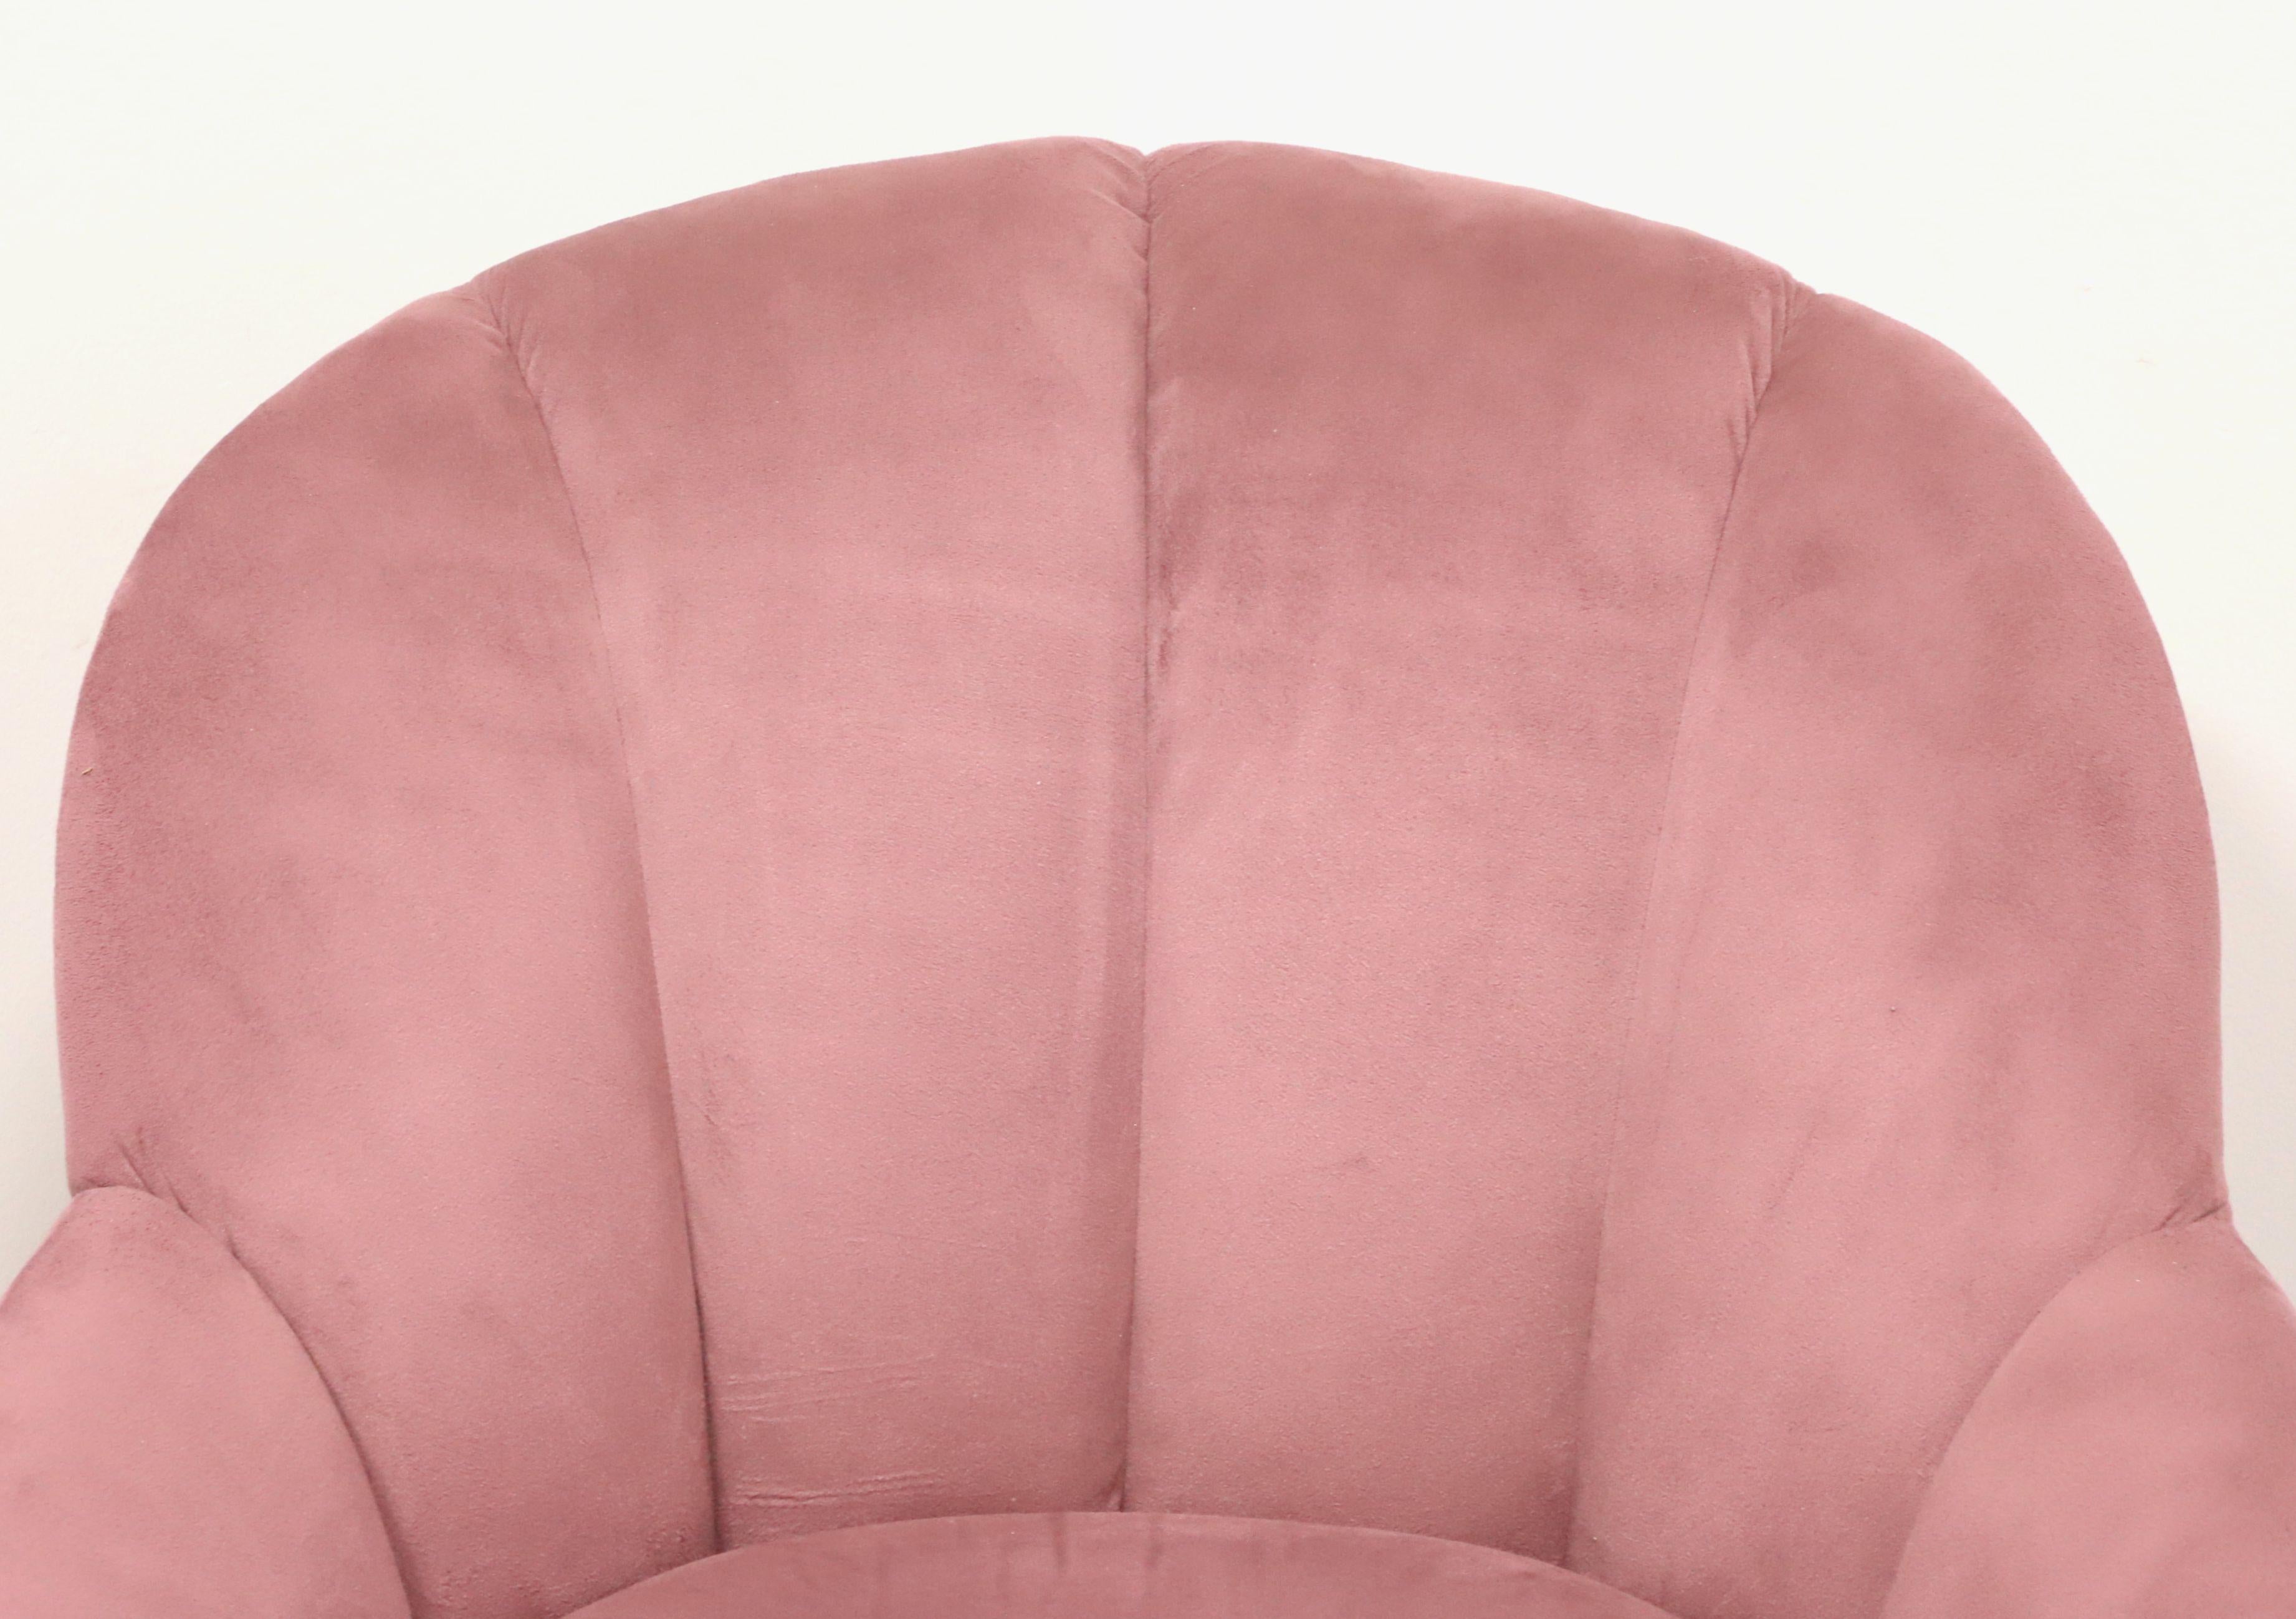 American CLASSIC GALLERY Late 20th Century Art Deco Mauve Club Chair For Sale